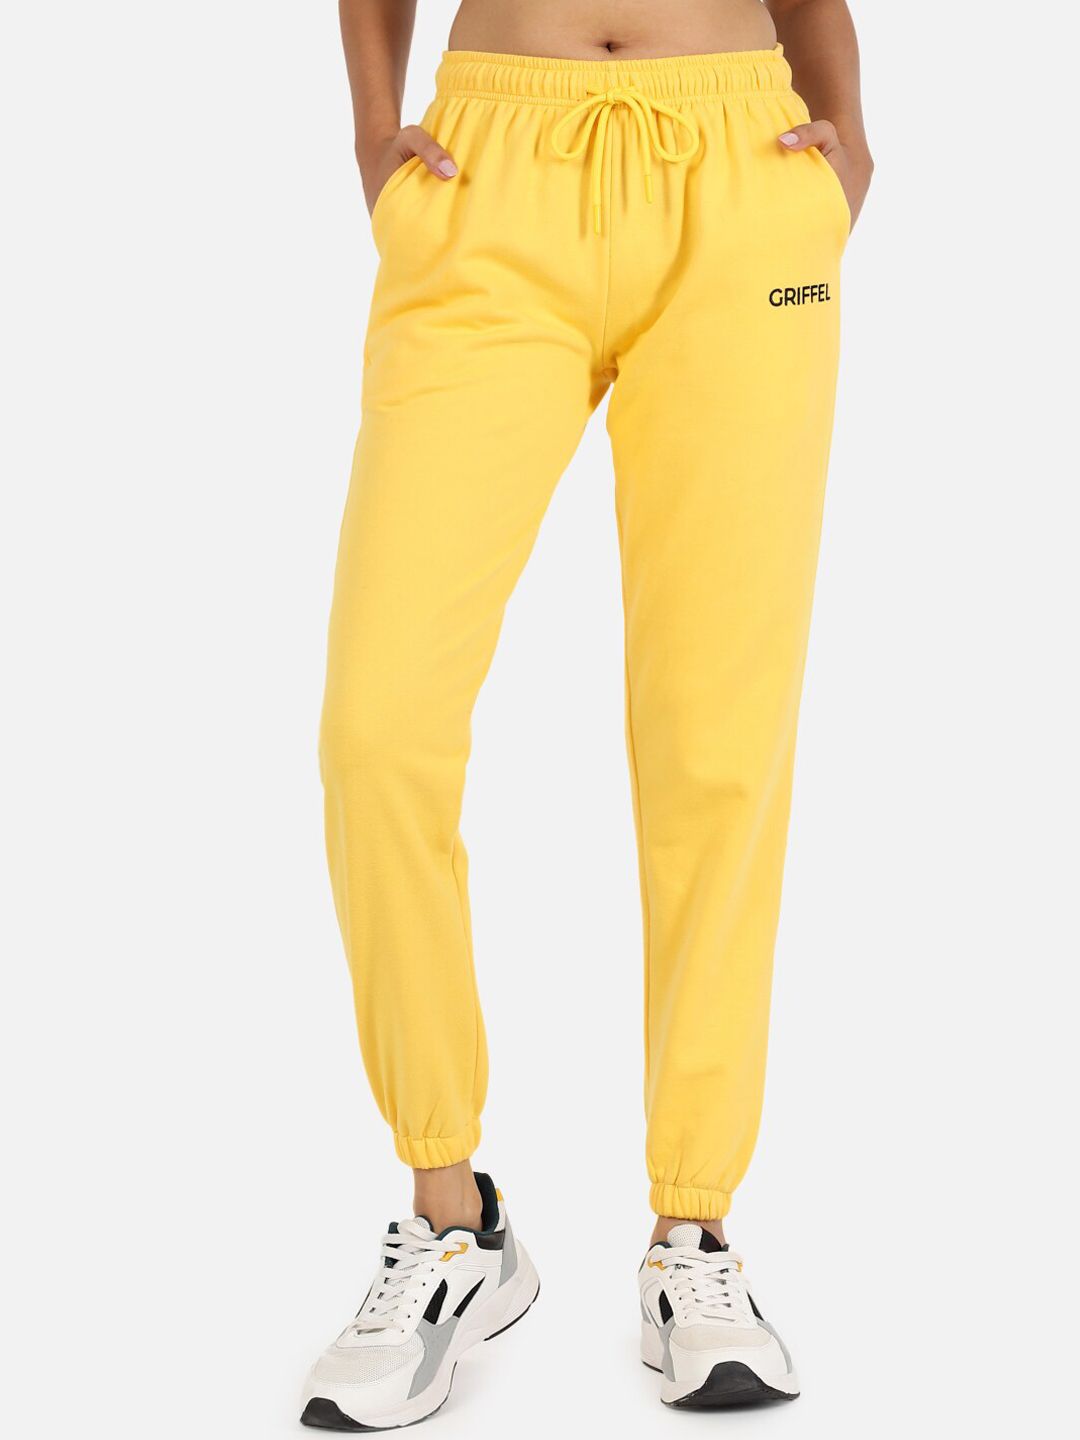 GRIFFEL Women Yellow Solid Cotton Joggers Price in India